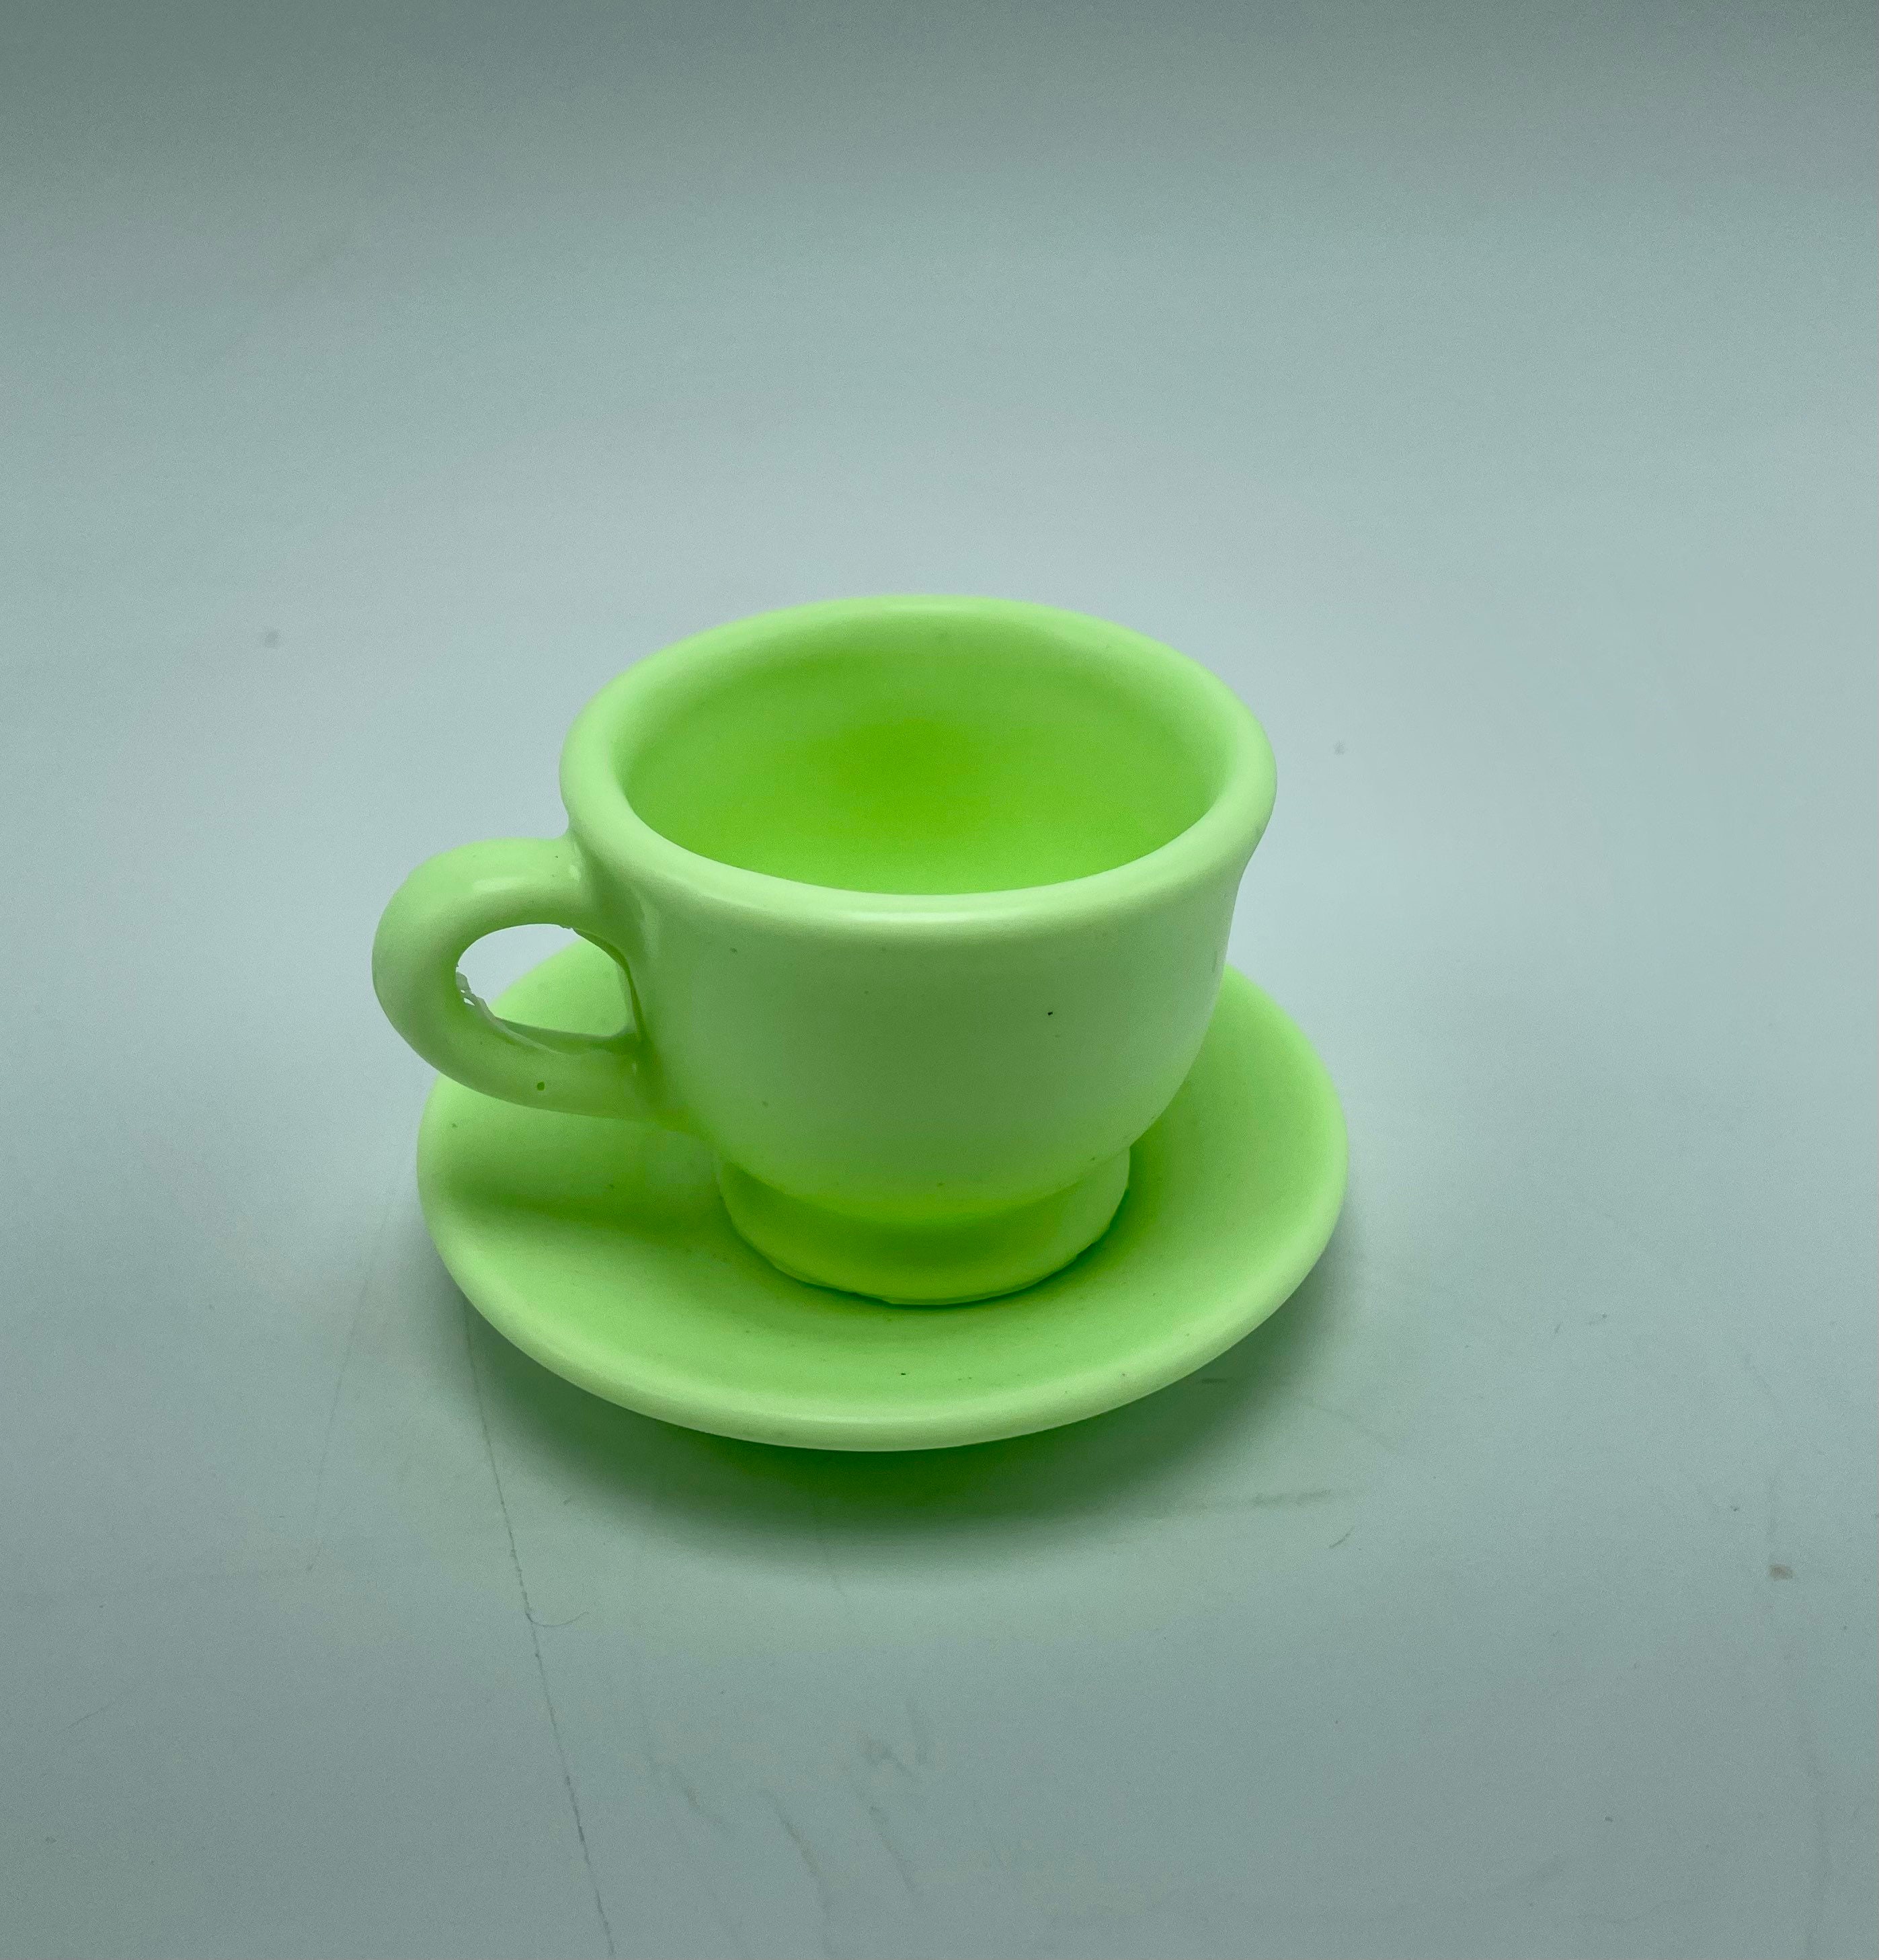 Wholesale Self Heating Mug Products at Factory Prices from Manufacturers in  China, India, Korea, etc.